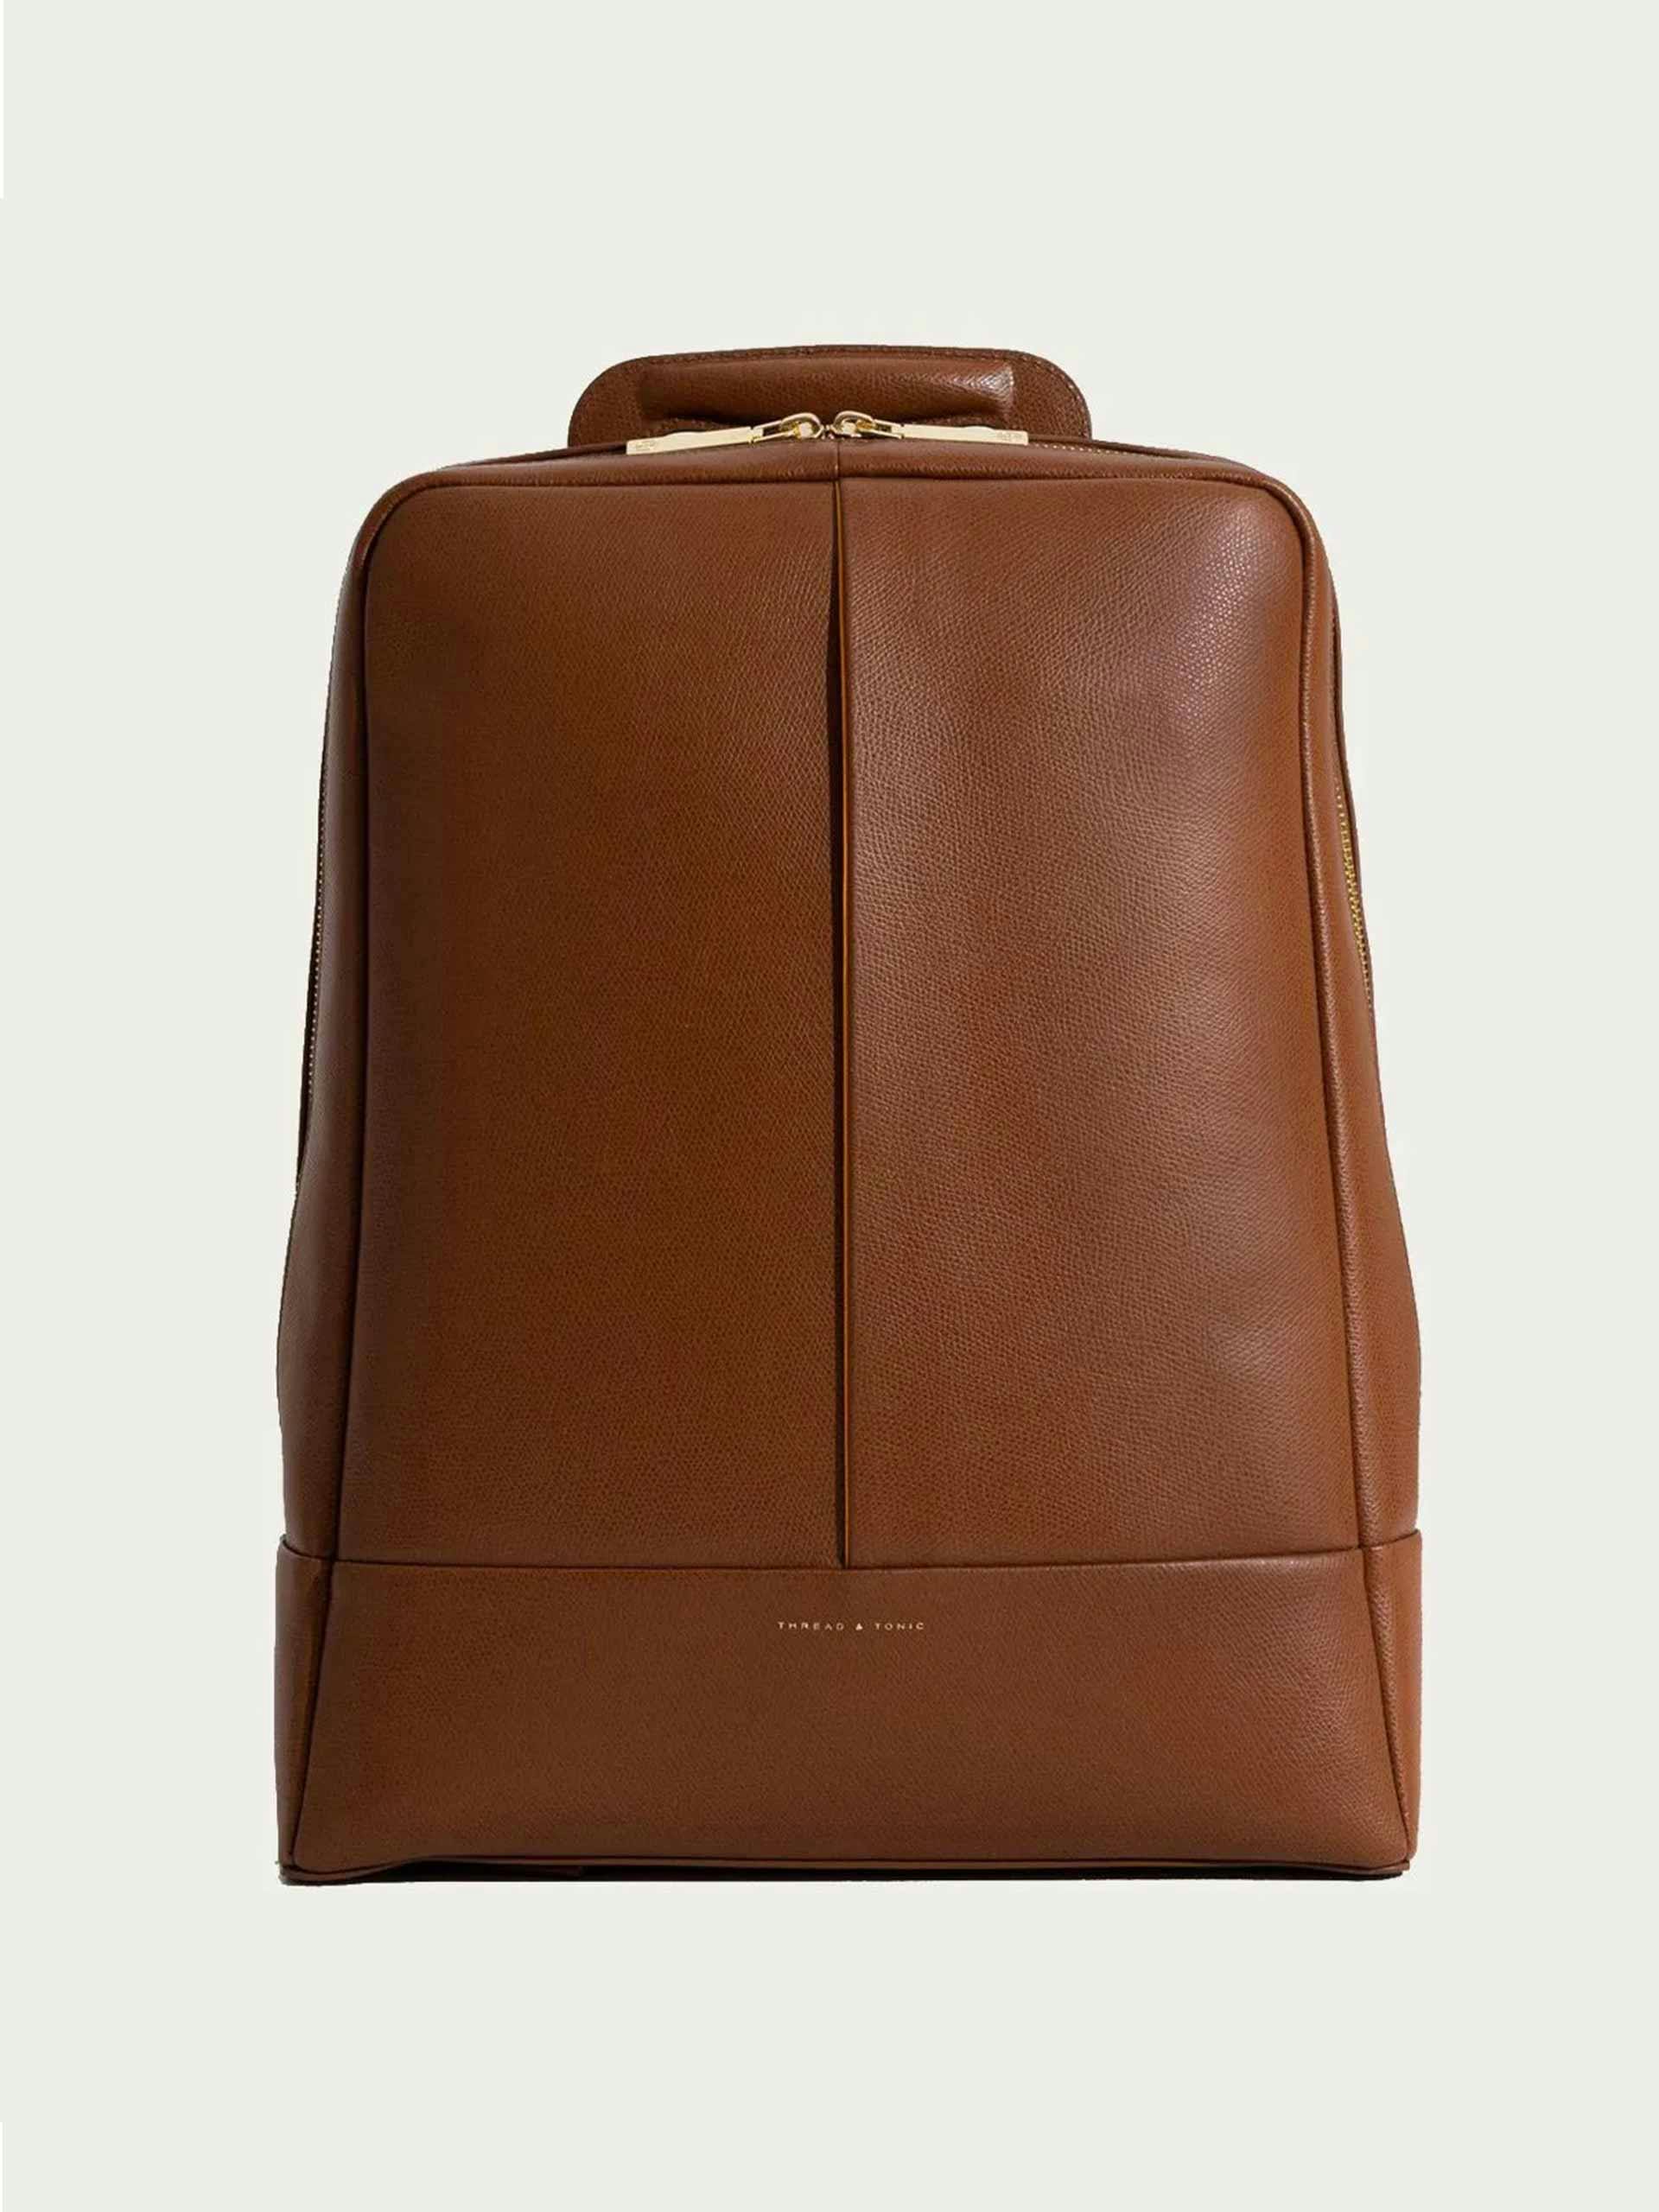 Tan leather backpack